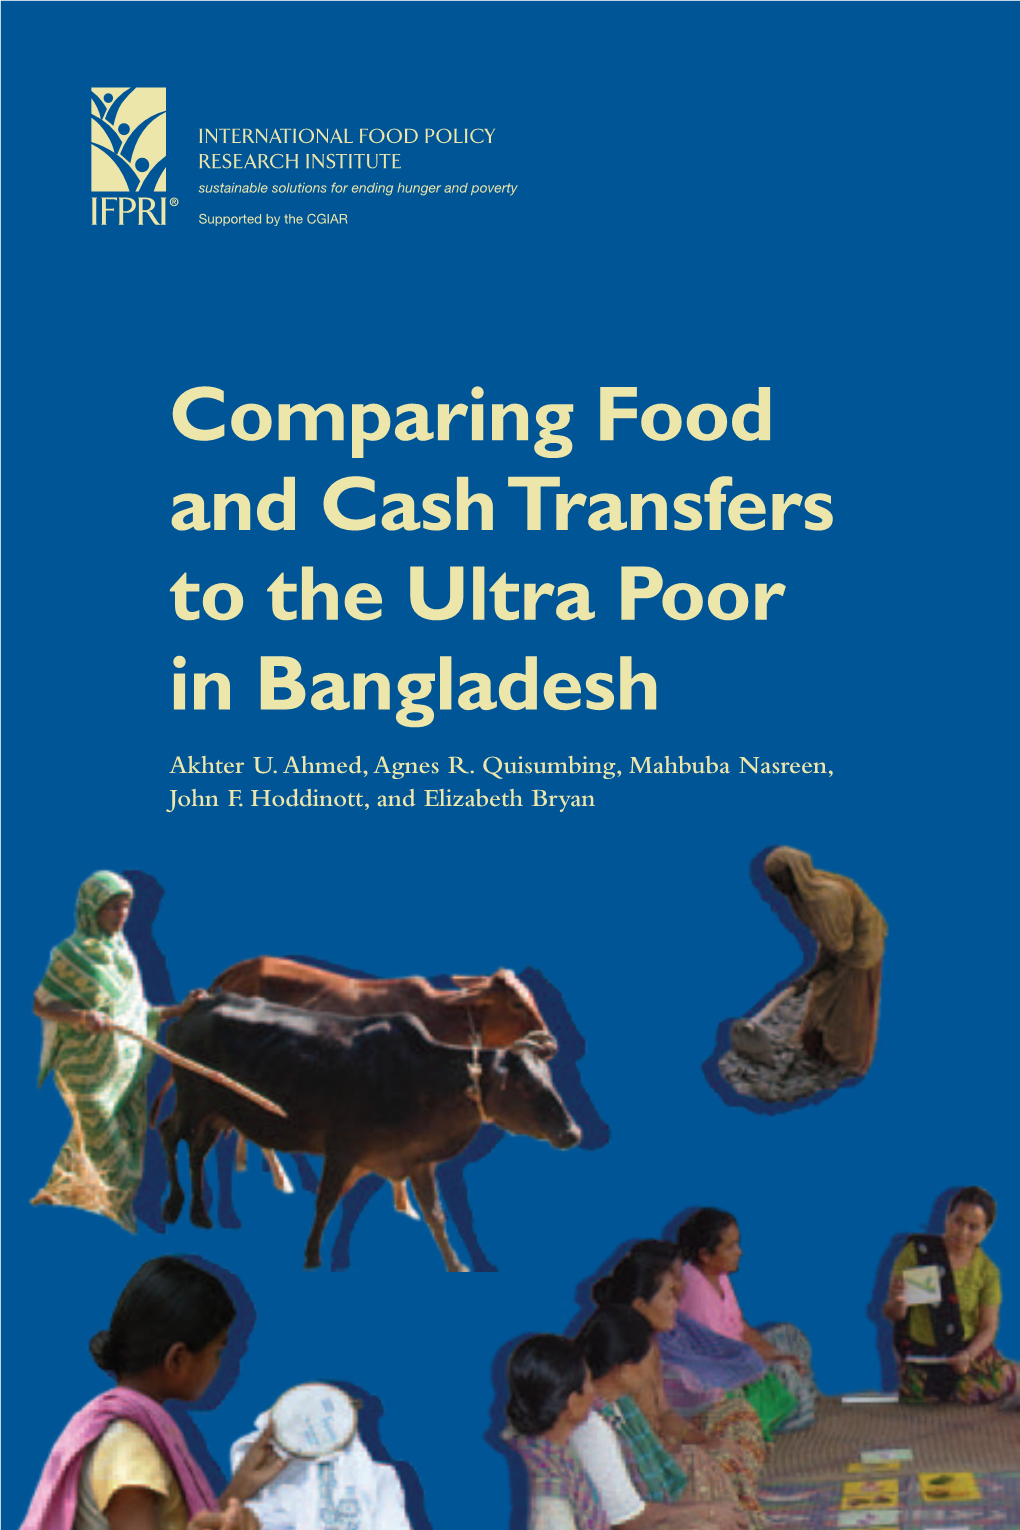 Comparing Food and Cash Transfers to the Ultra-Poor in Bangladesh